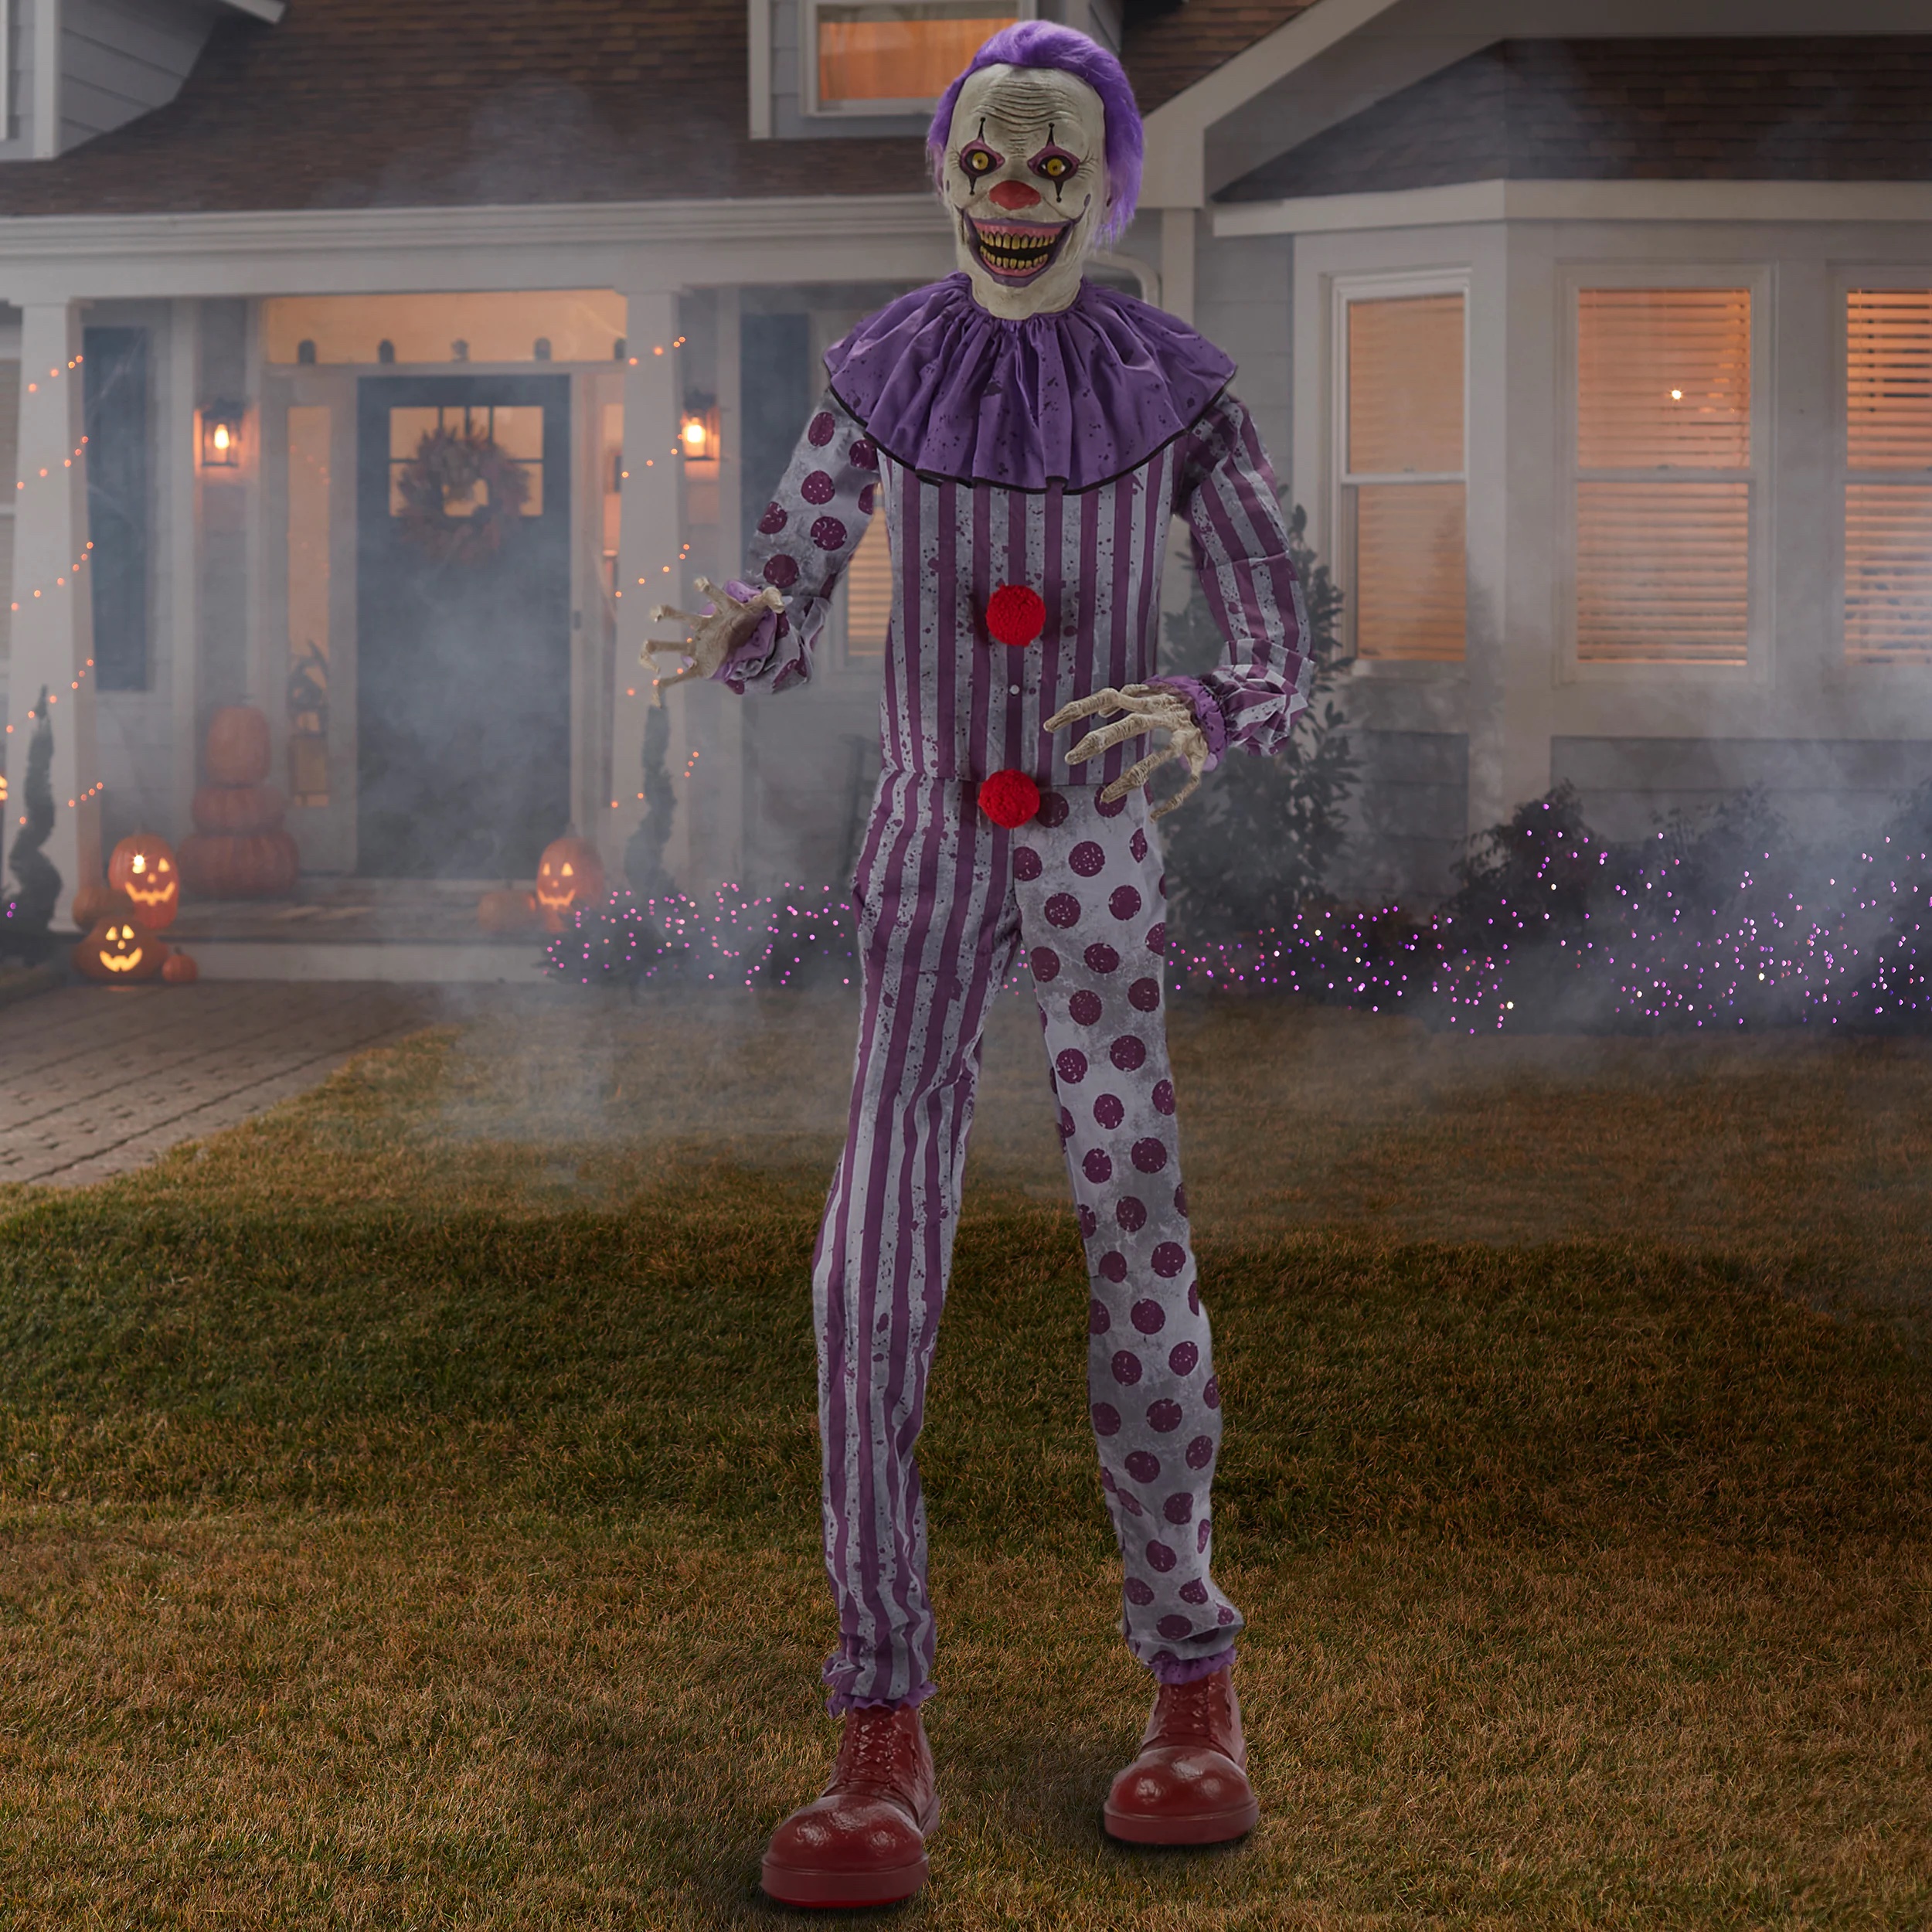 Animatronic Clown in a front yard